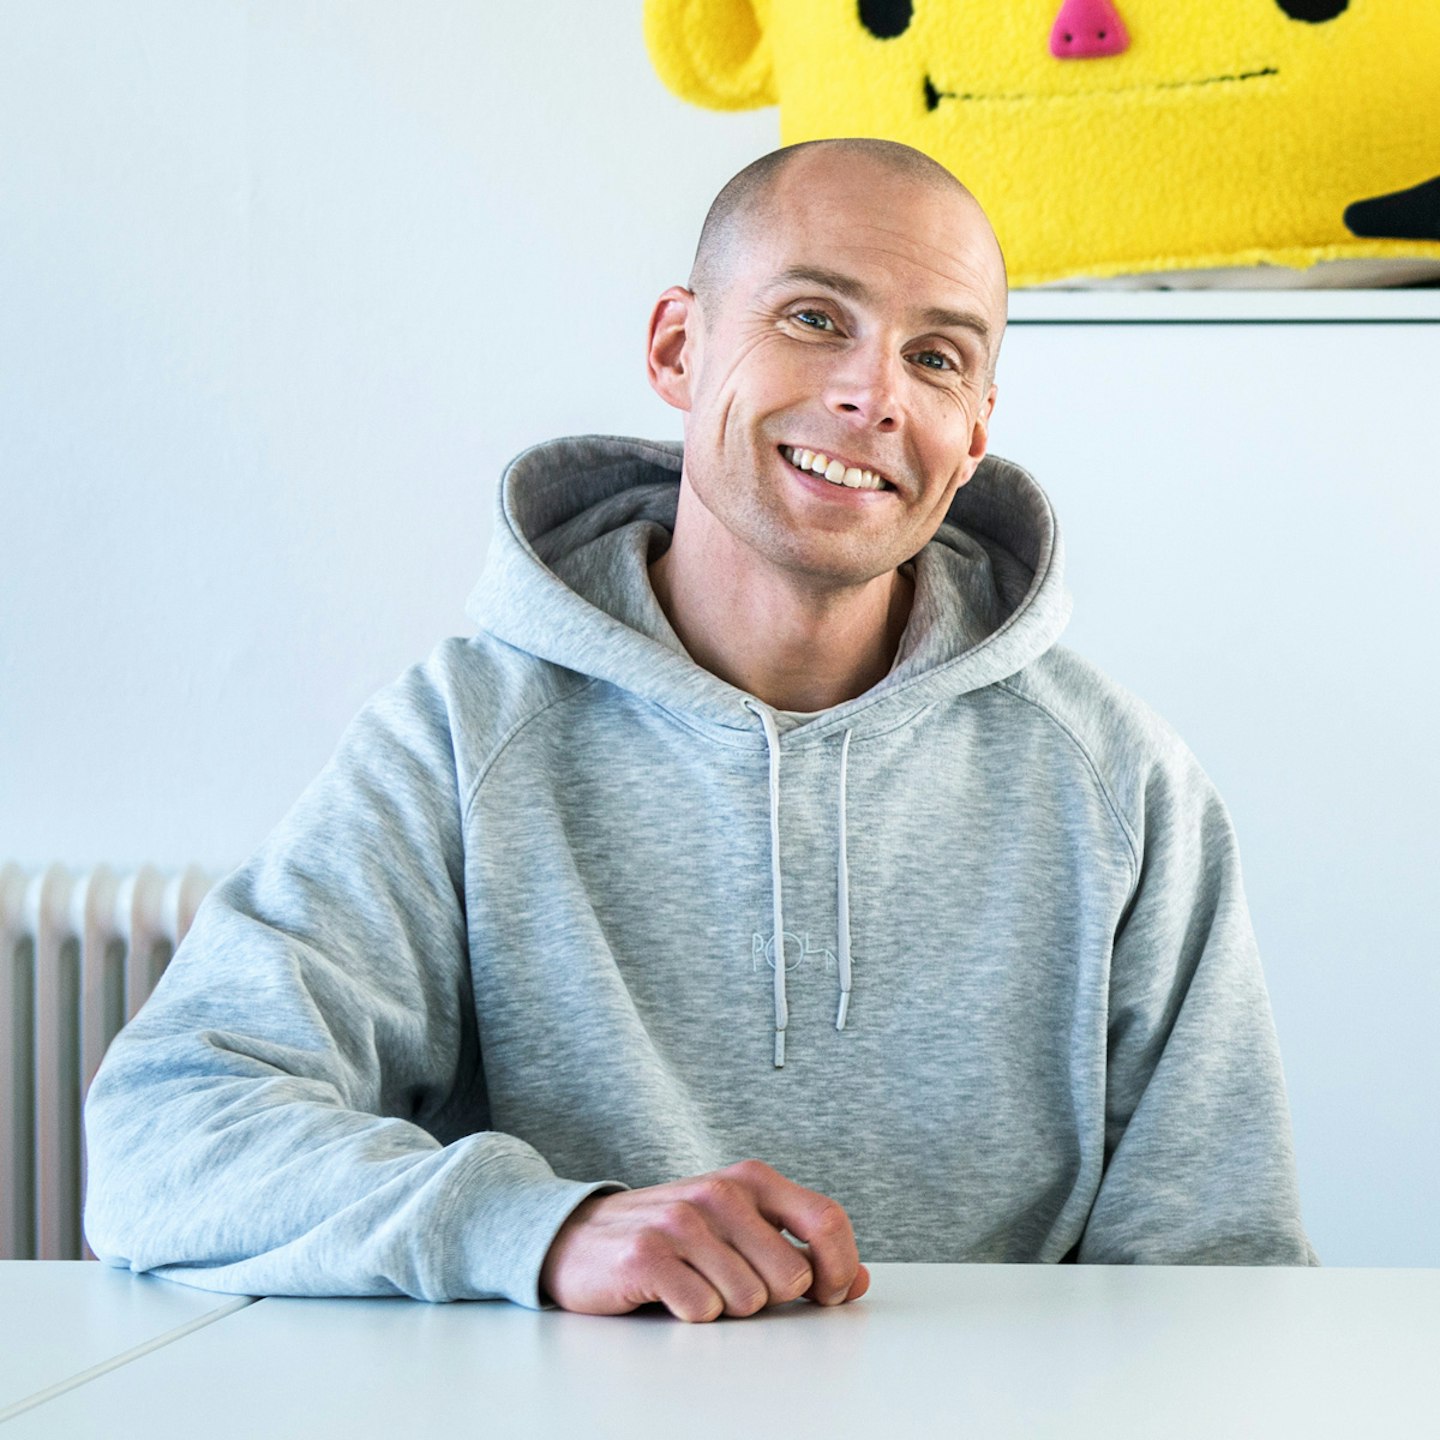 This is a photo of Emil Ovemar, Co-founder and Head of Studio for Toca Boca. He is sitting relaxed at a white table smiling wearing a grey hoodie. In the background there is a fluffy costume head of Bo, one of the characters from Toca Boca World